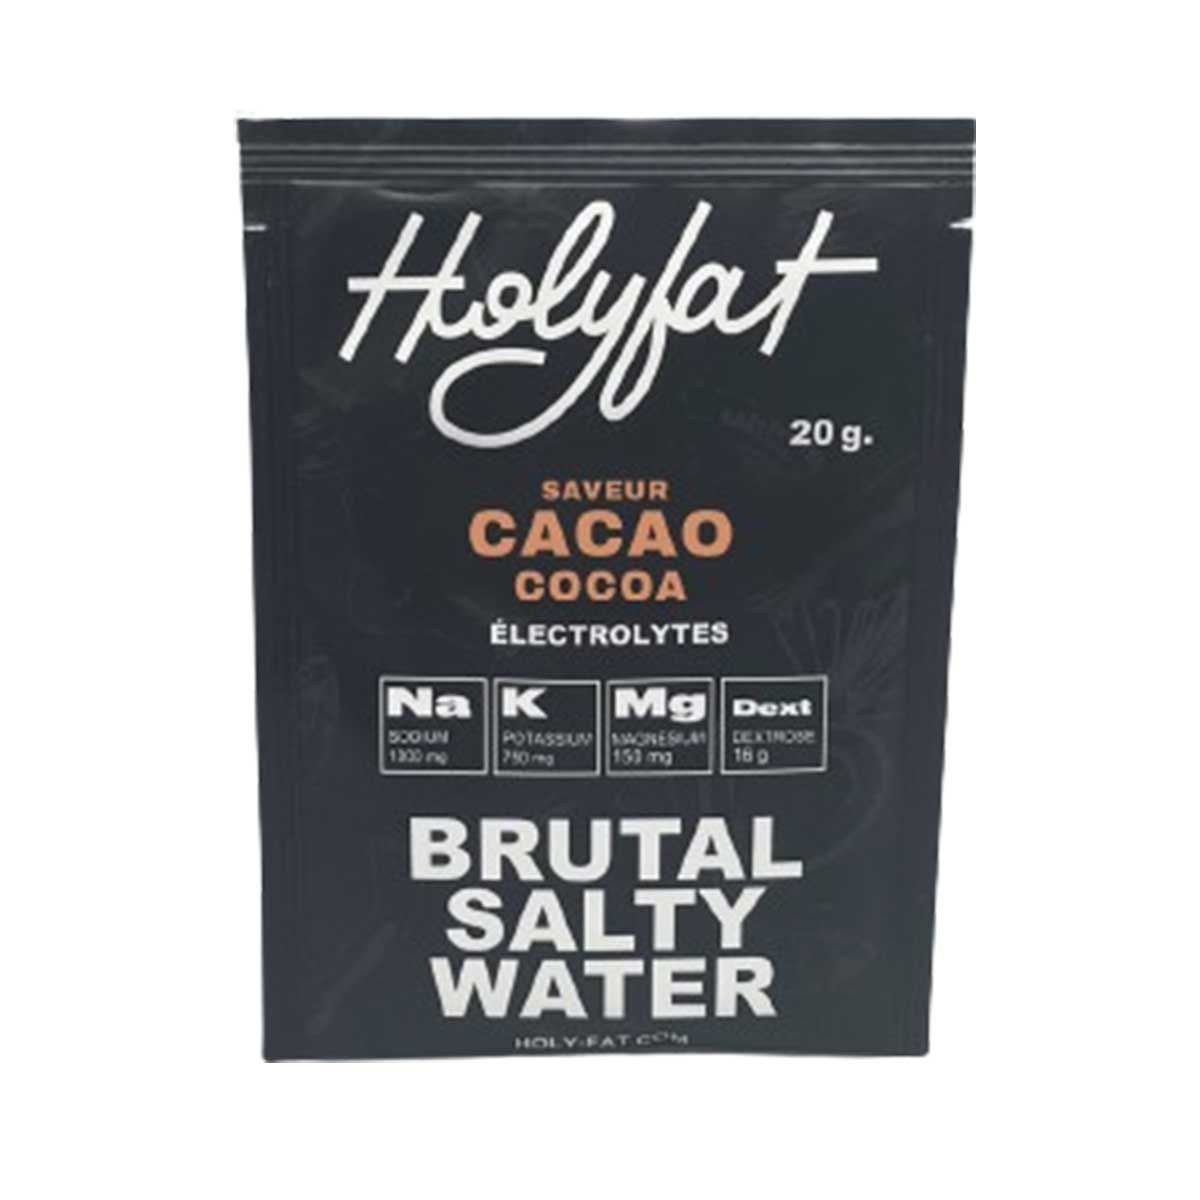 Holyfat electrolyte drink - Cocoa